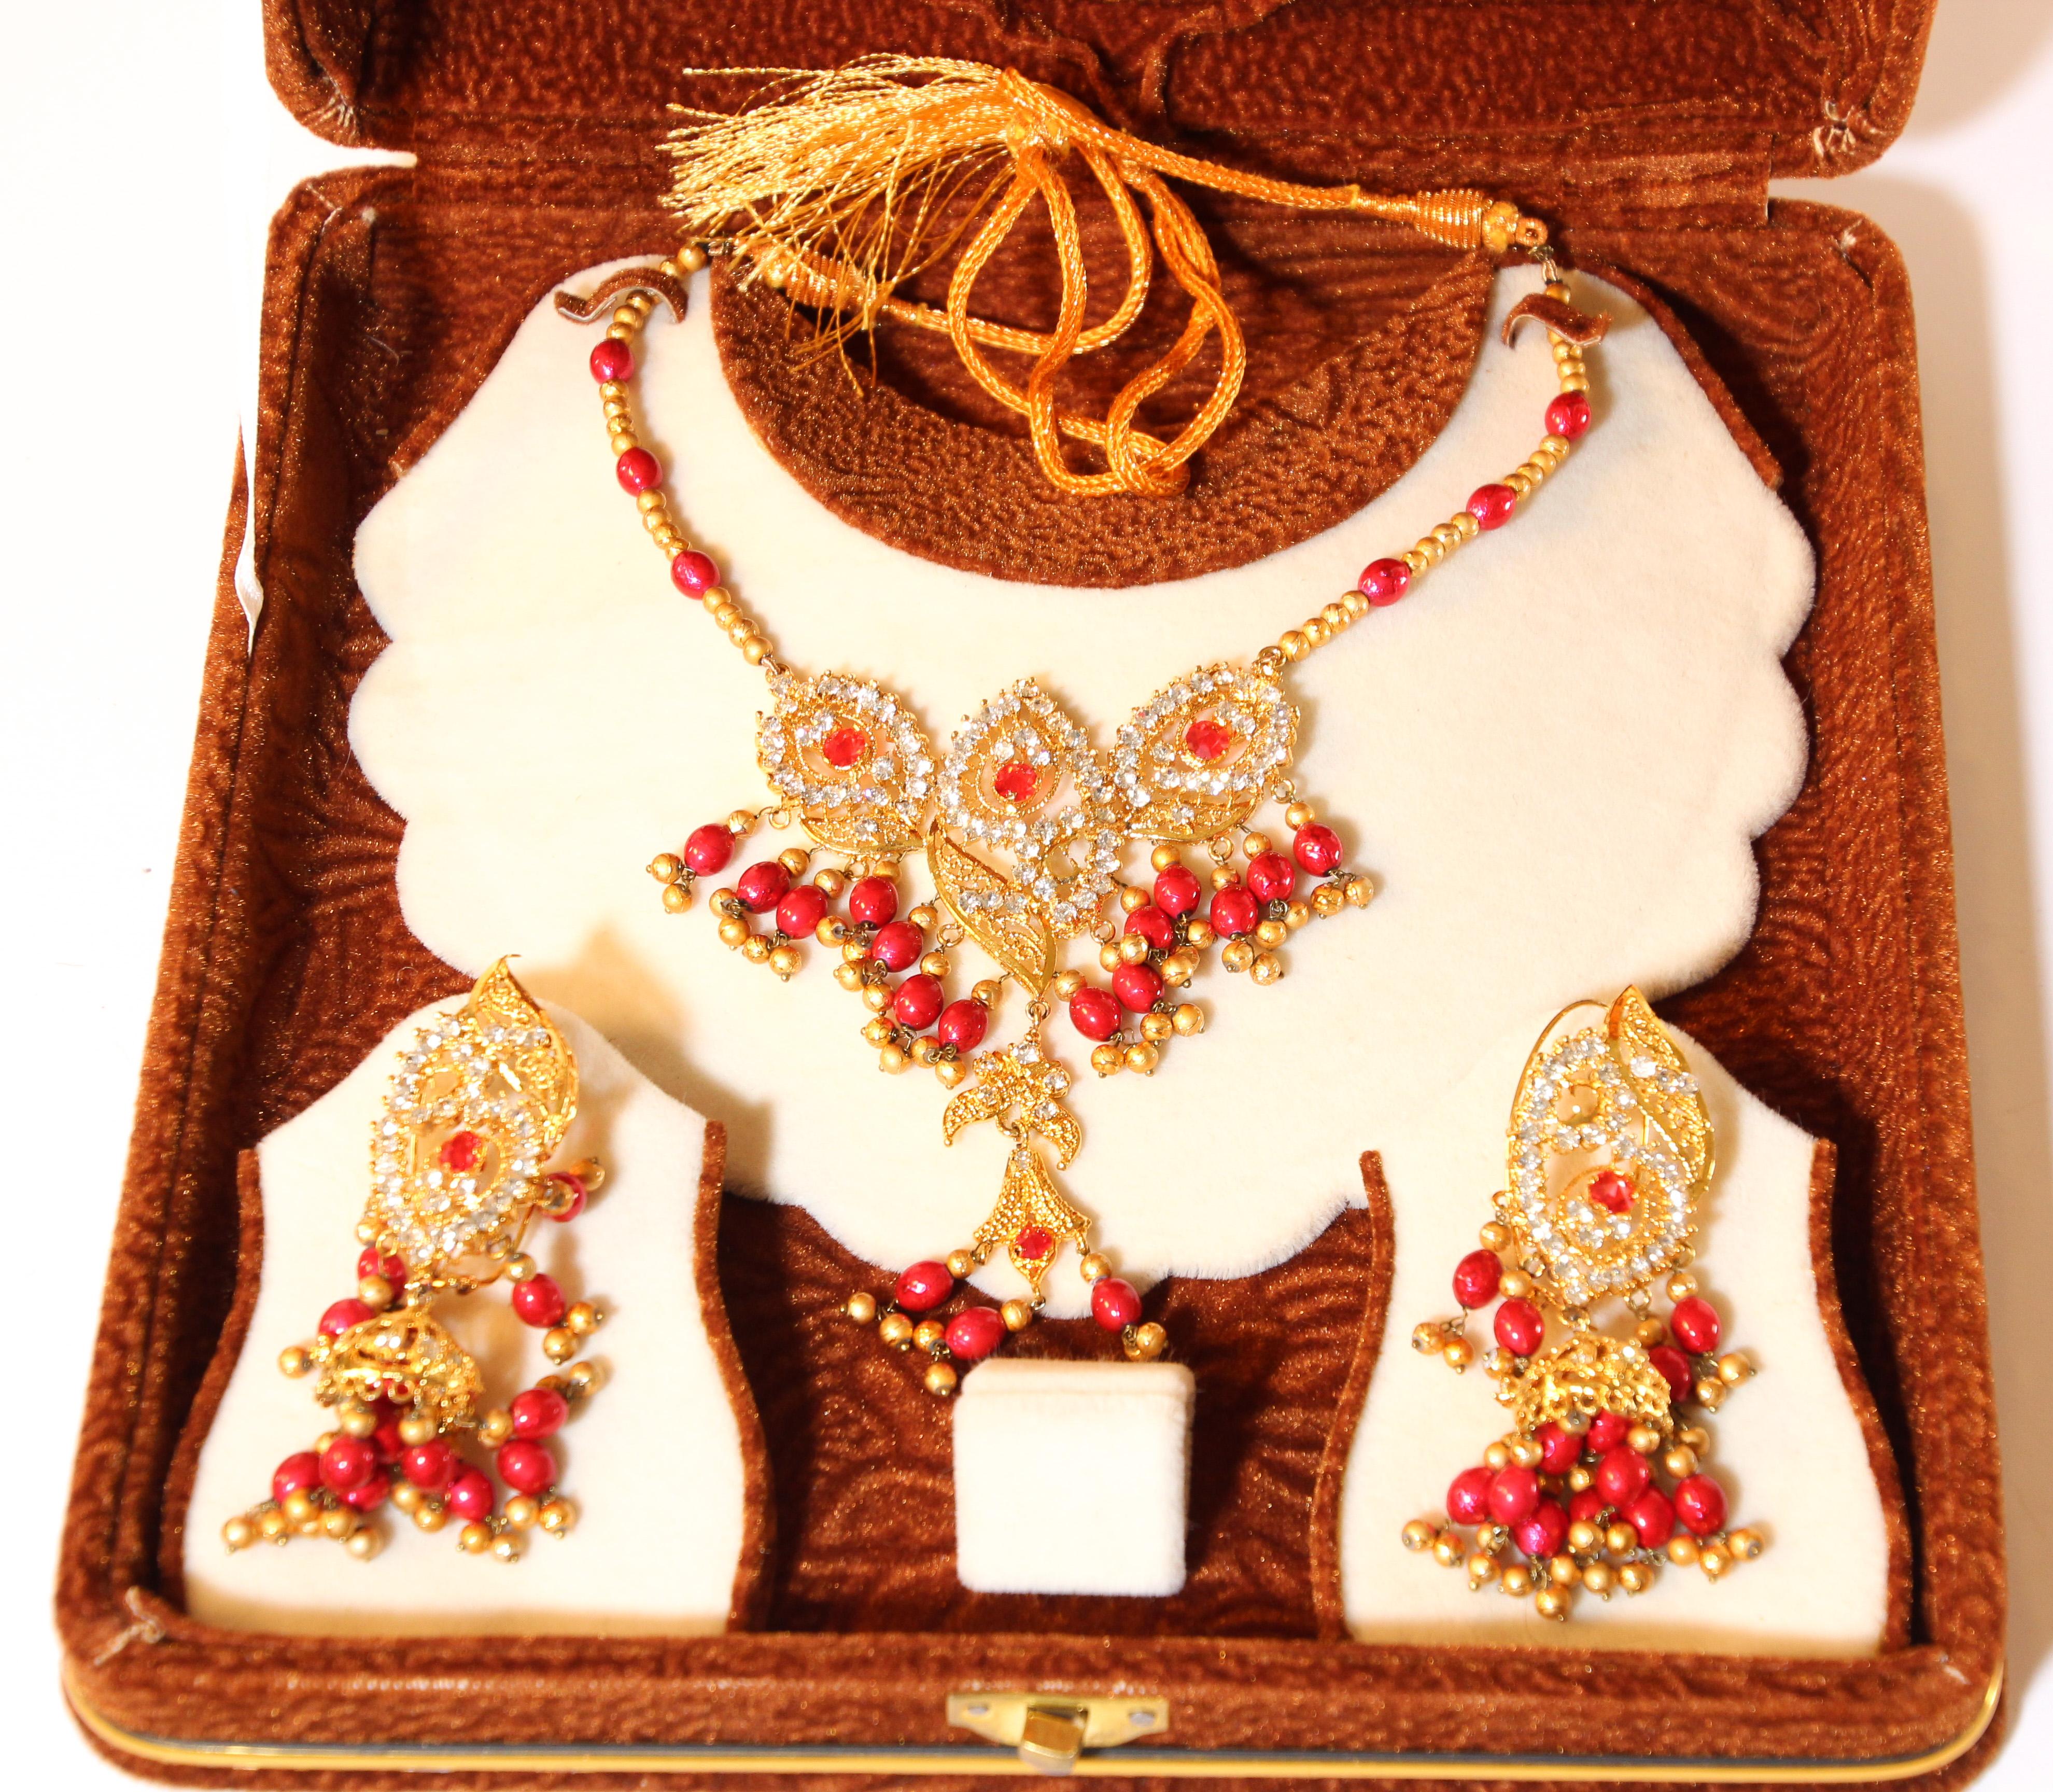 Vintage beautiful yellow gold plated India jewelry earrings and necklace set.
Vintage chocker or headpiece embellished with colorful glass beads in red.
South Indian gold plated Bollywood style jewelry bridal set.
Imperial Maharani ceremonial